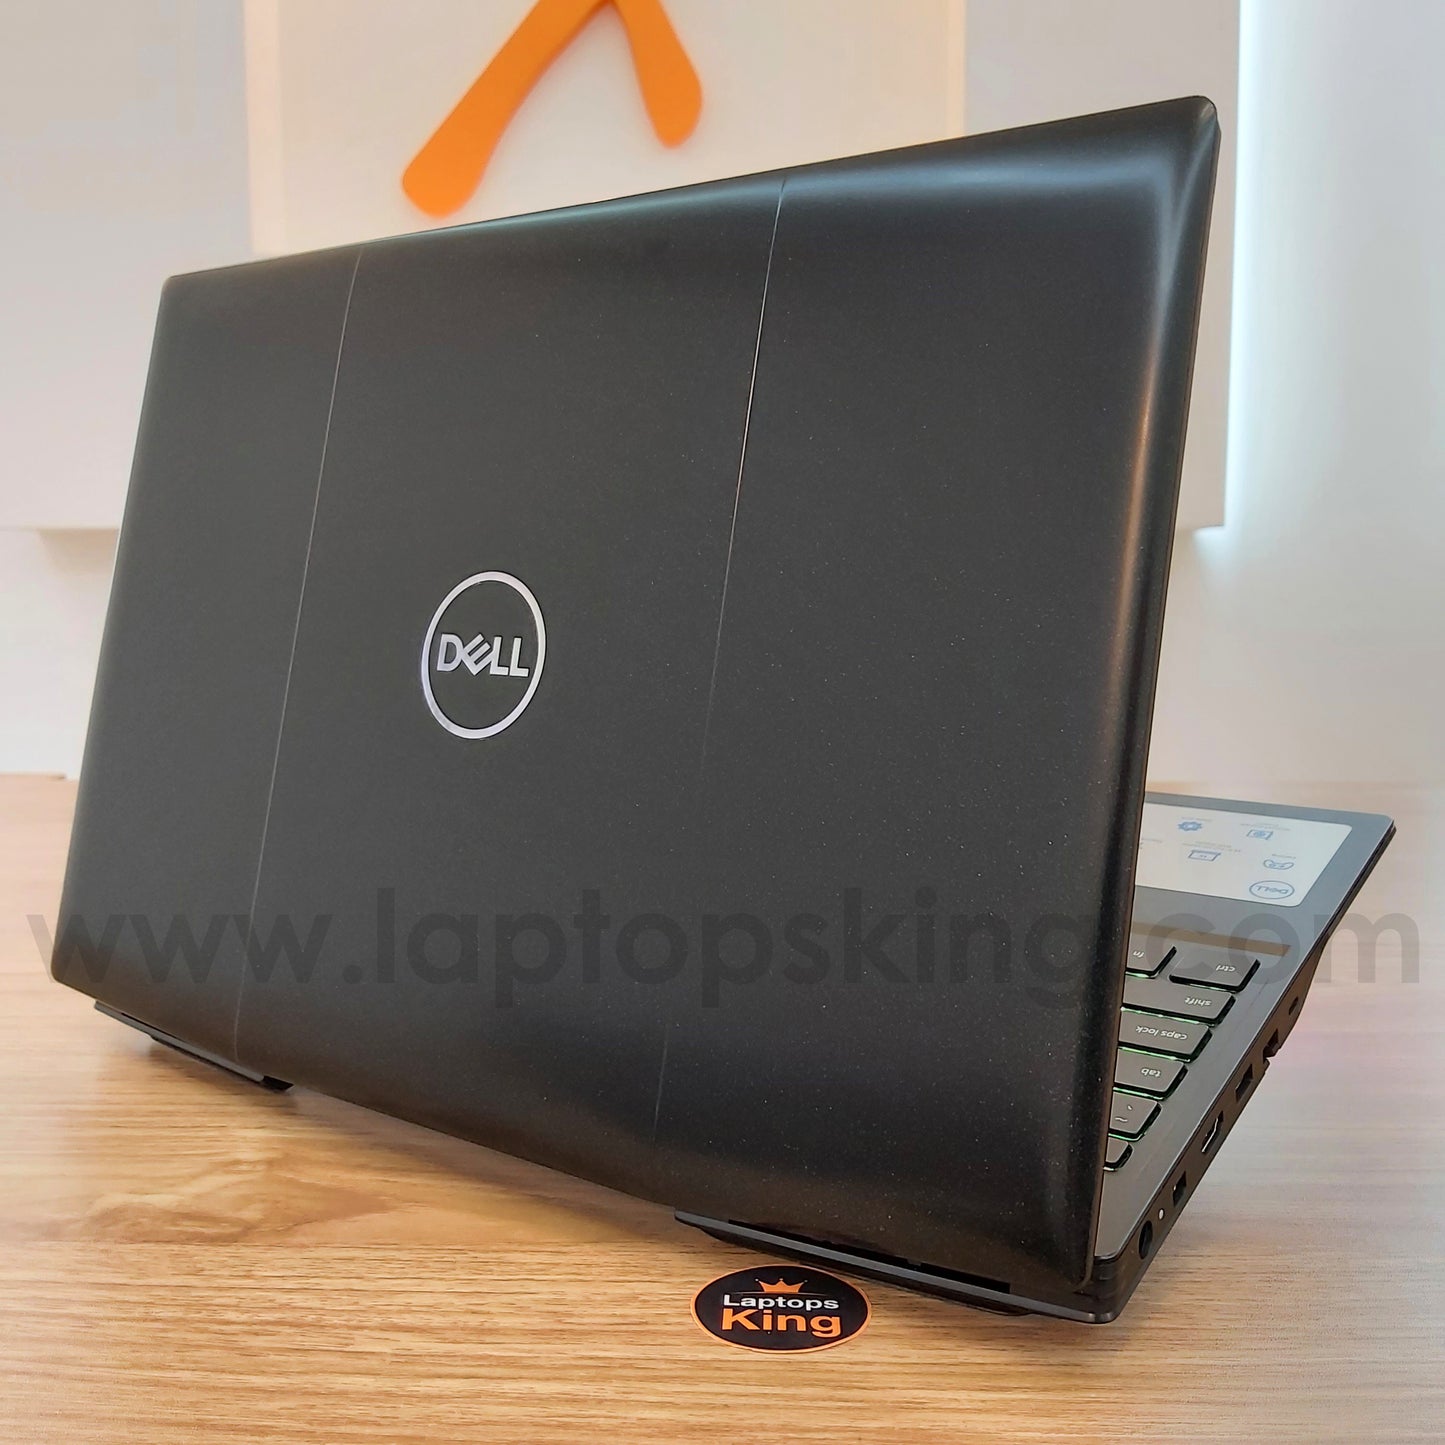 Dell G5 5500 i7-10750h Rtx 2060 144hz Rgb Gaming Laptop Offers (Open Box)